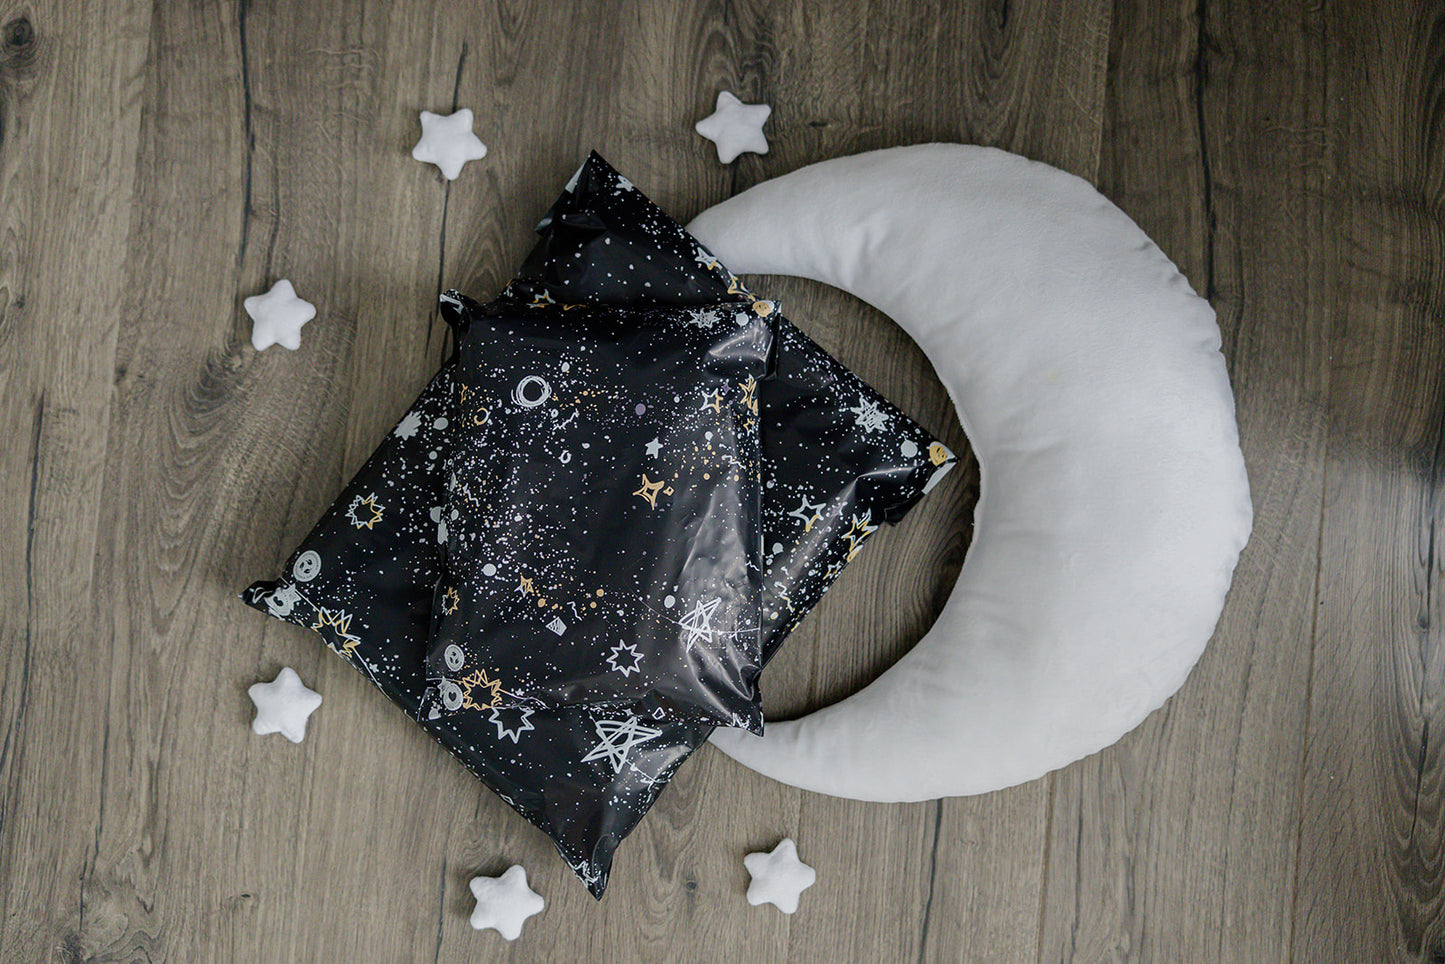 A recyclable Midnight Galaxy Mailers 10" x 13" pillow with stars and a crescent design laid on a wooden floor by impack.co.